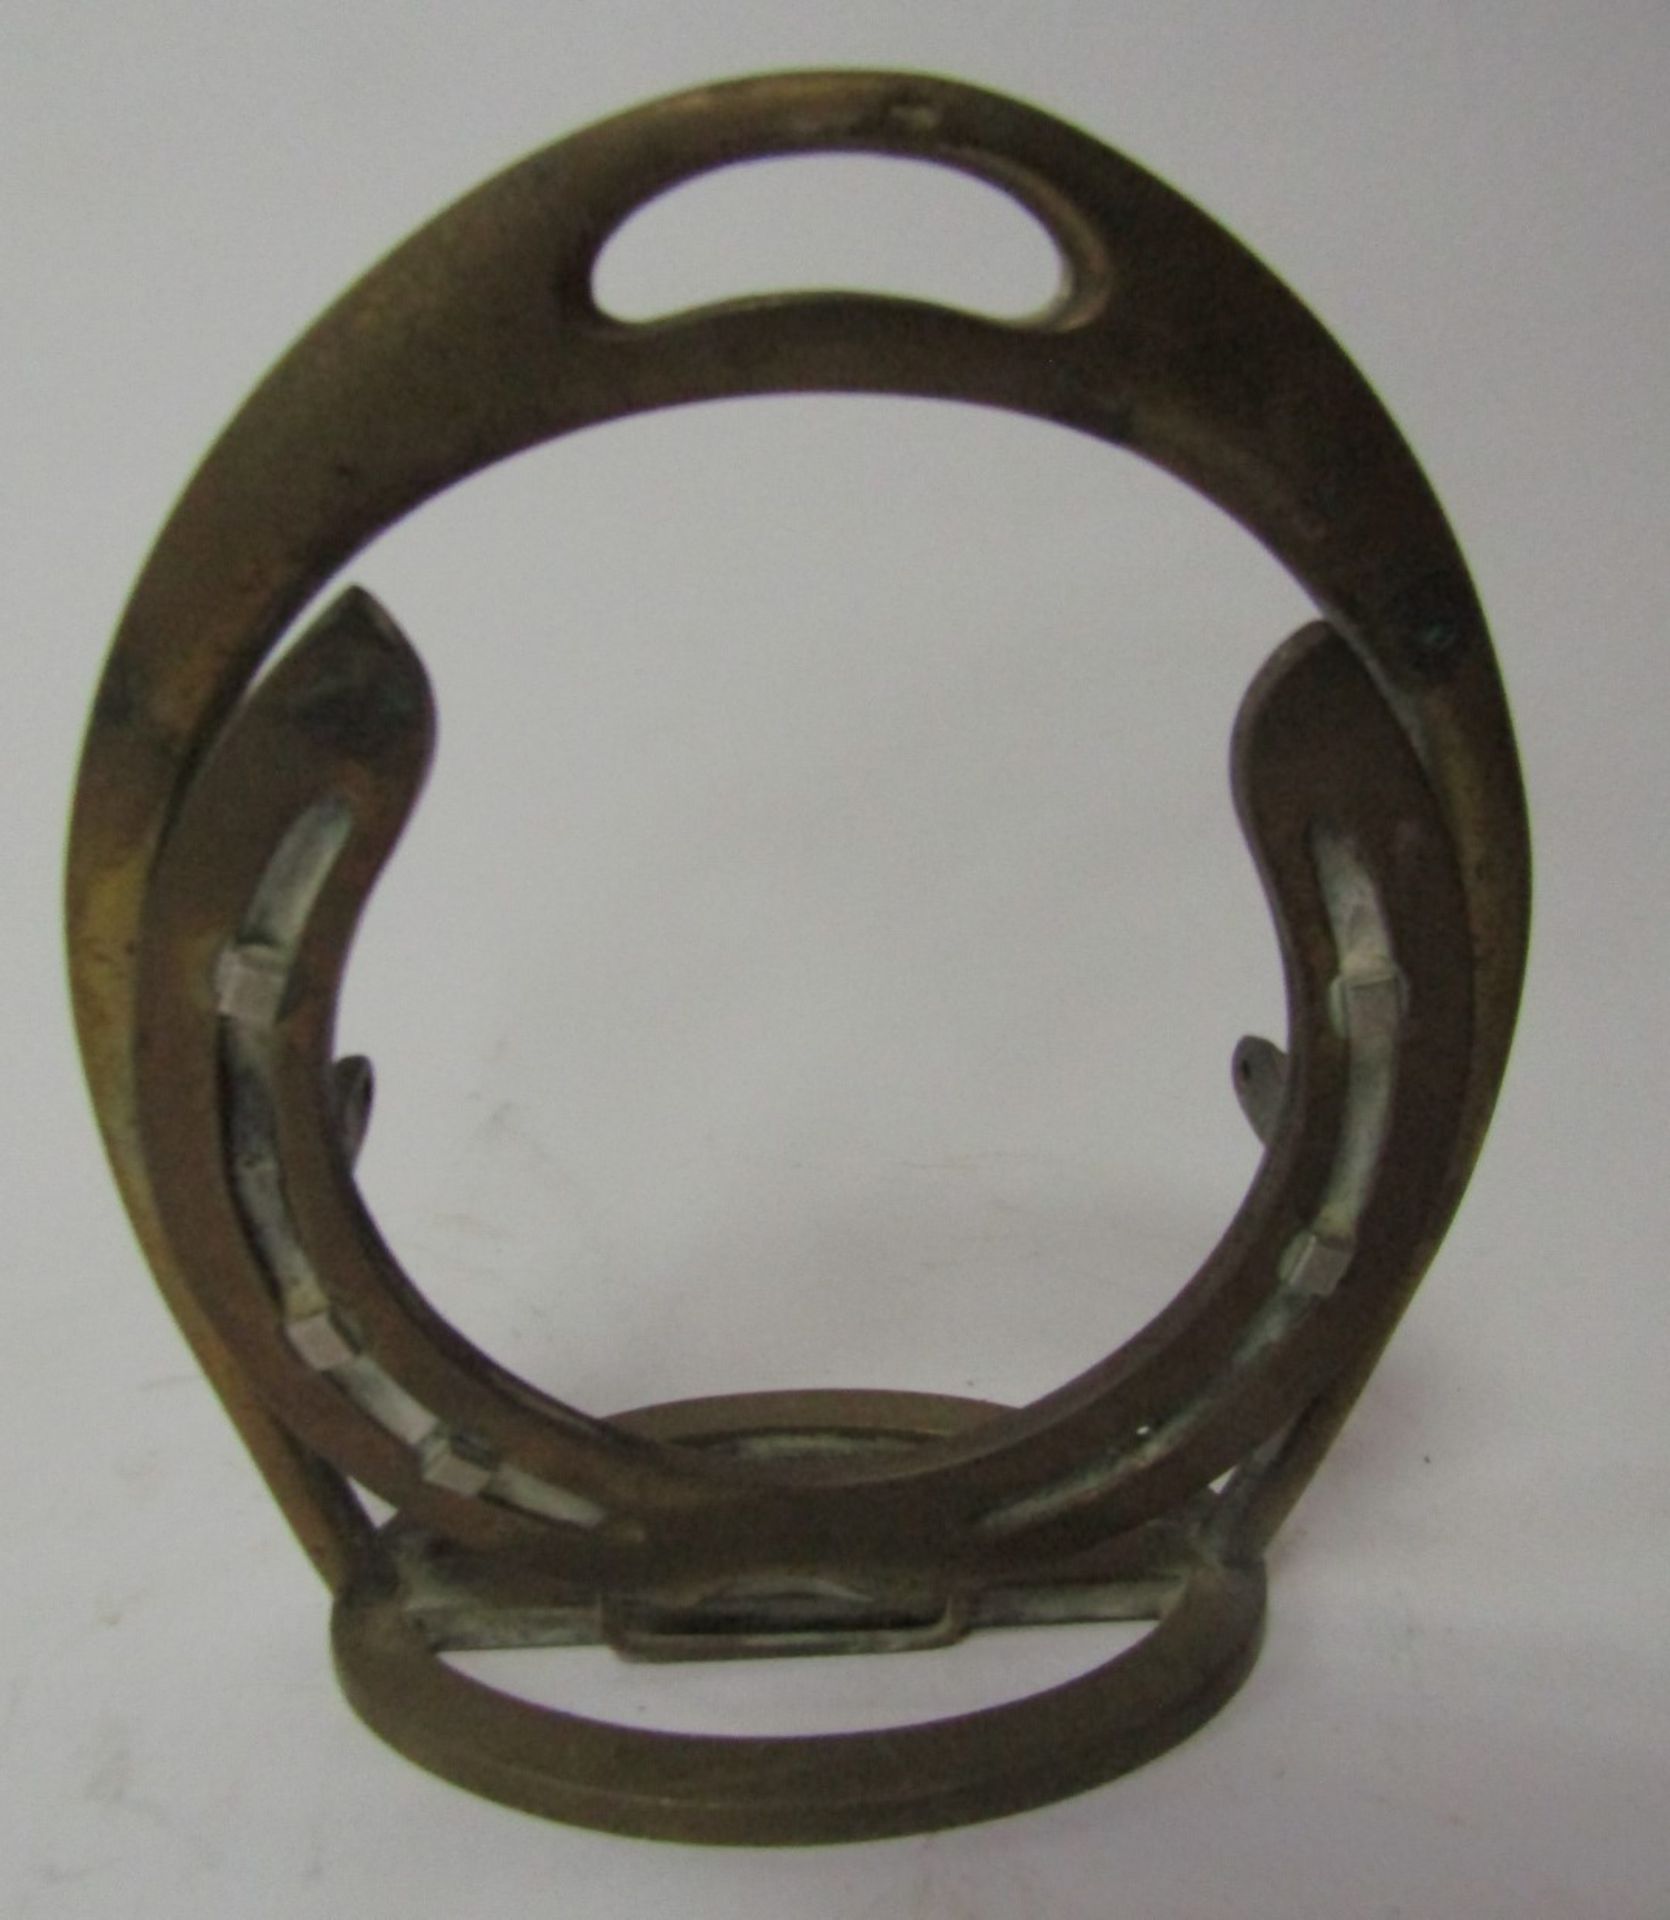 Three novelty clock stands, formed from a stirrup with horseshoe mount, one including clock face sta - Image 5 of 5